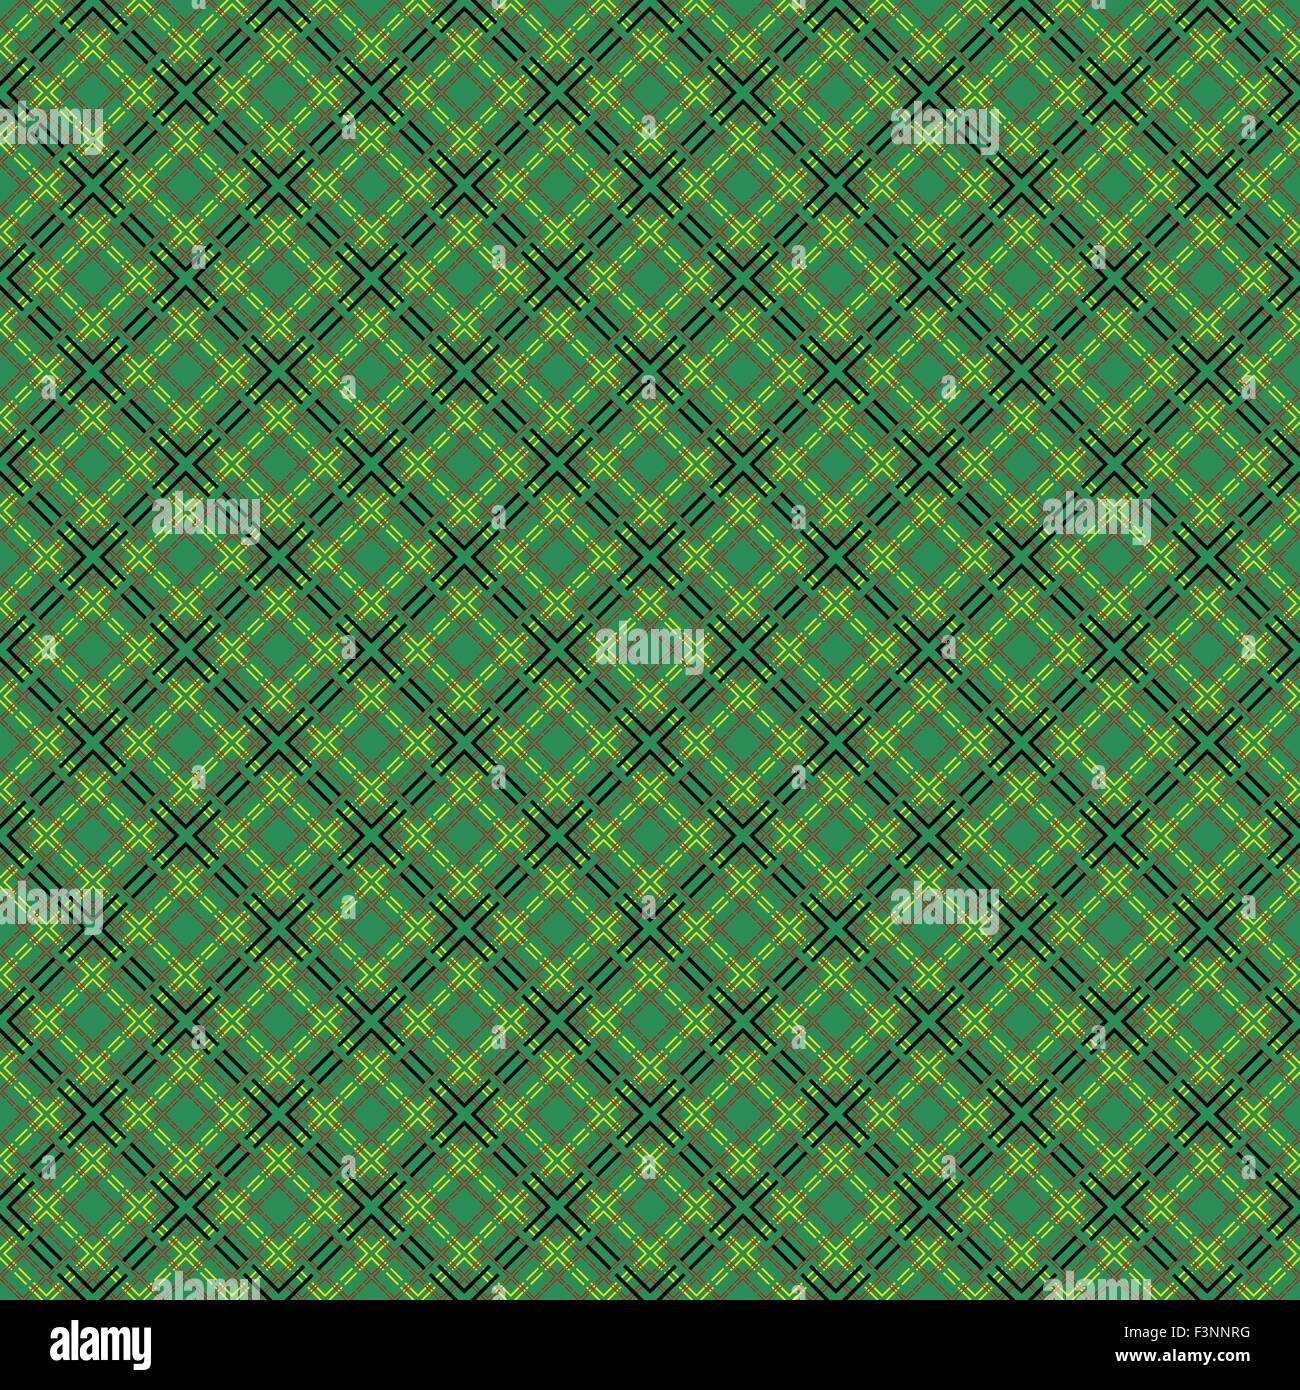 100,000 Mesh fabric Vector Images